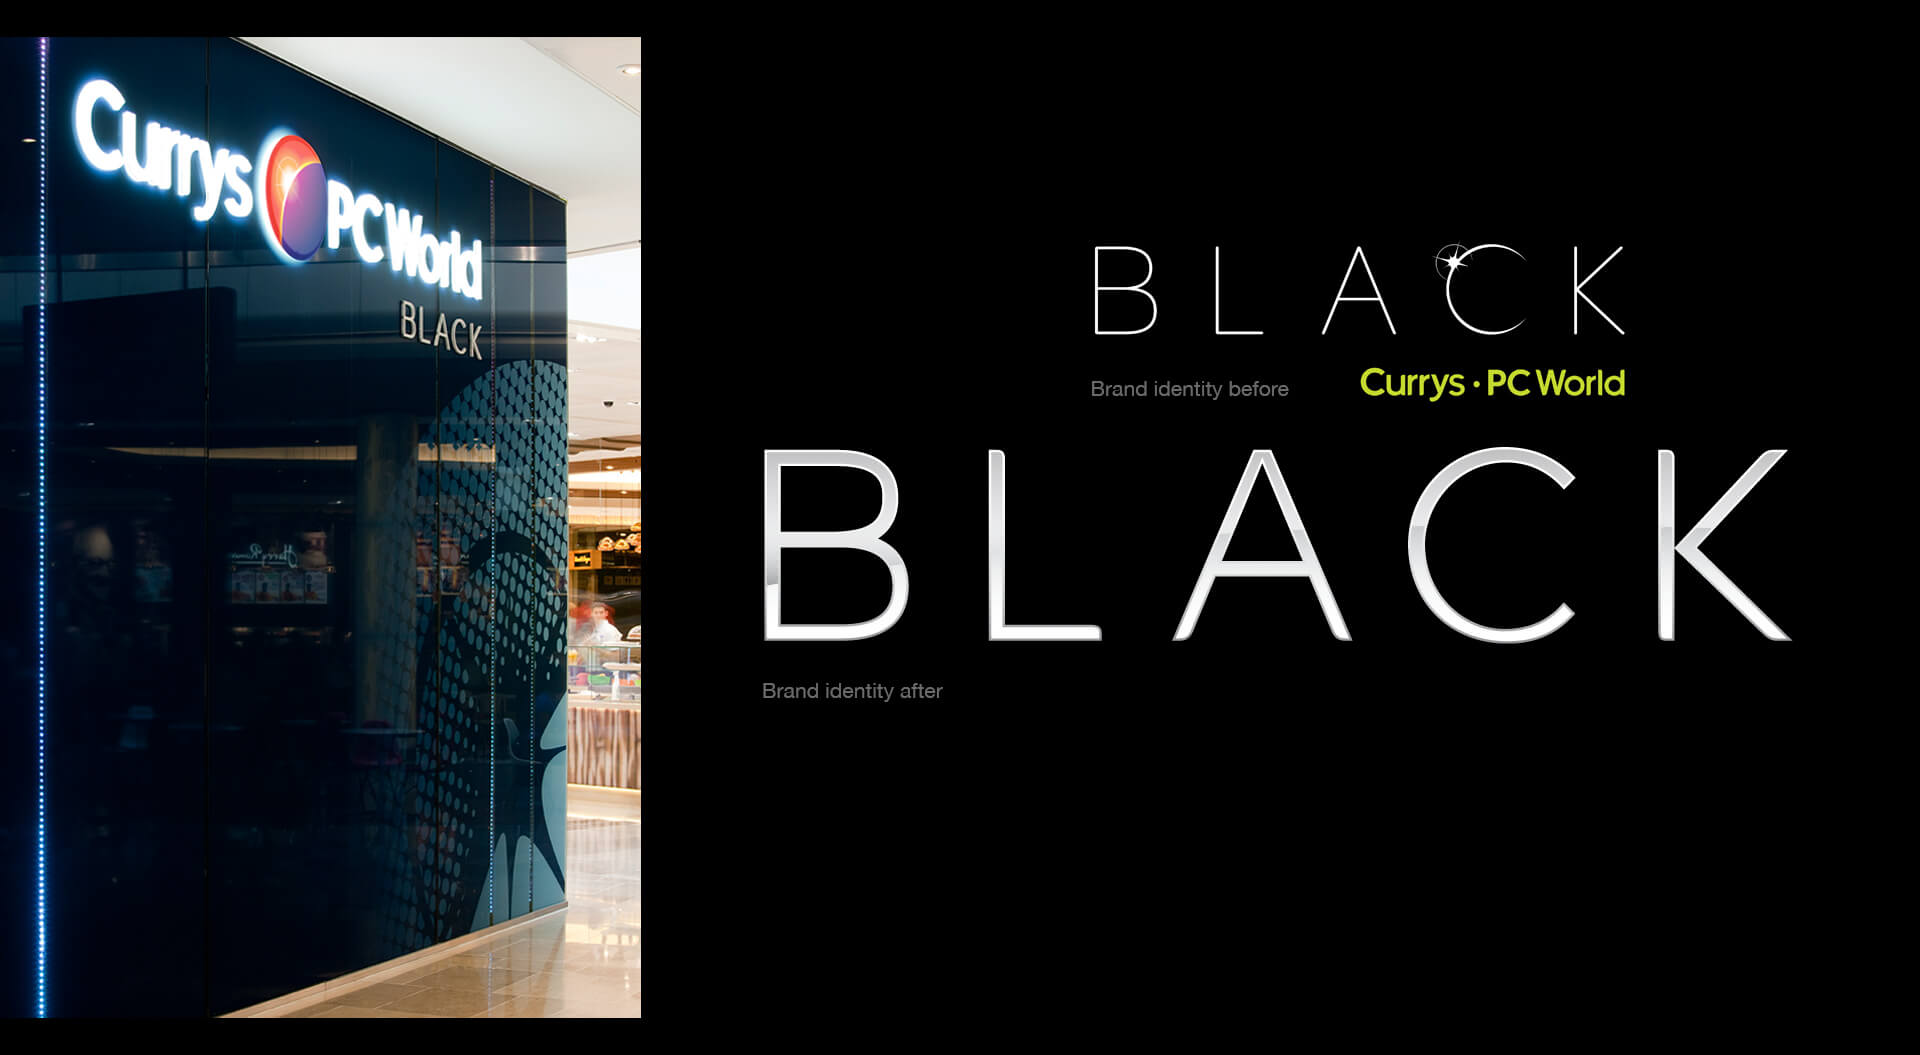 Currys PC World Black brand identity and store entrance